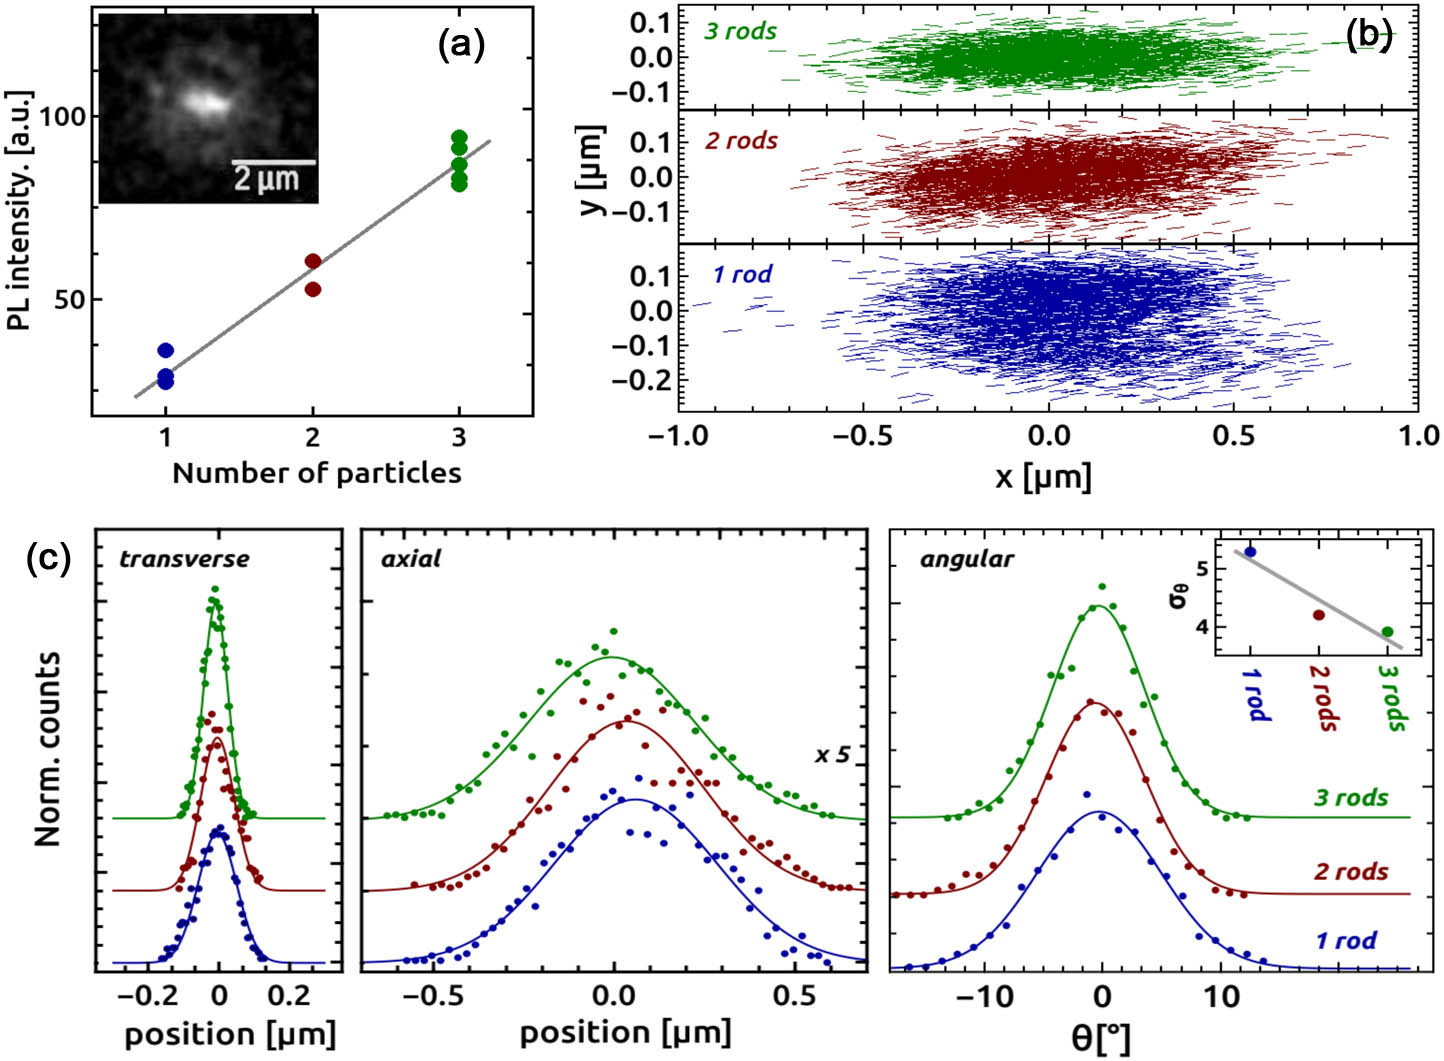 Optical trapping results. (a) PL intensity as a function of the number of nanorods in the trapped cluster. Inset: microscope photoluminescence image of a trapped nanorod. (b) Particle tracking plot for one single nanorod and clusters of two or three rods (P=32.2 mW). (c) Corresponding position (transverse and axial) and angular distributions. Inset: angular distribution width.